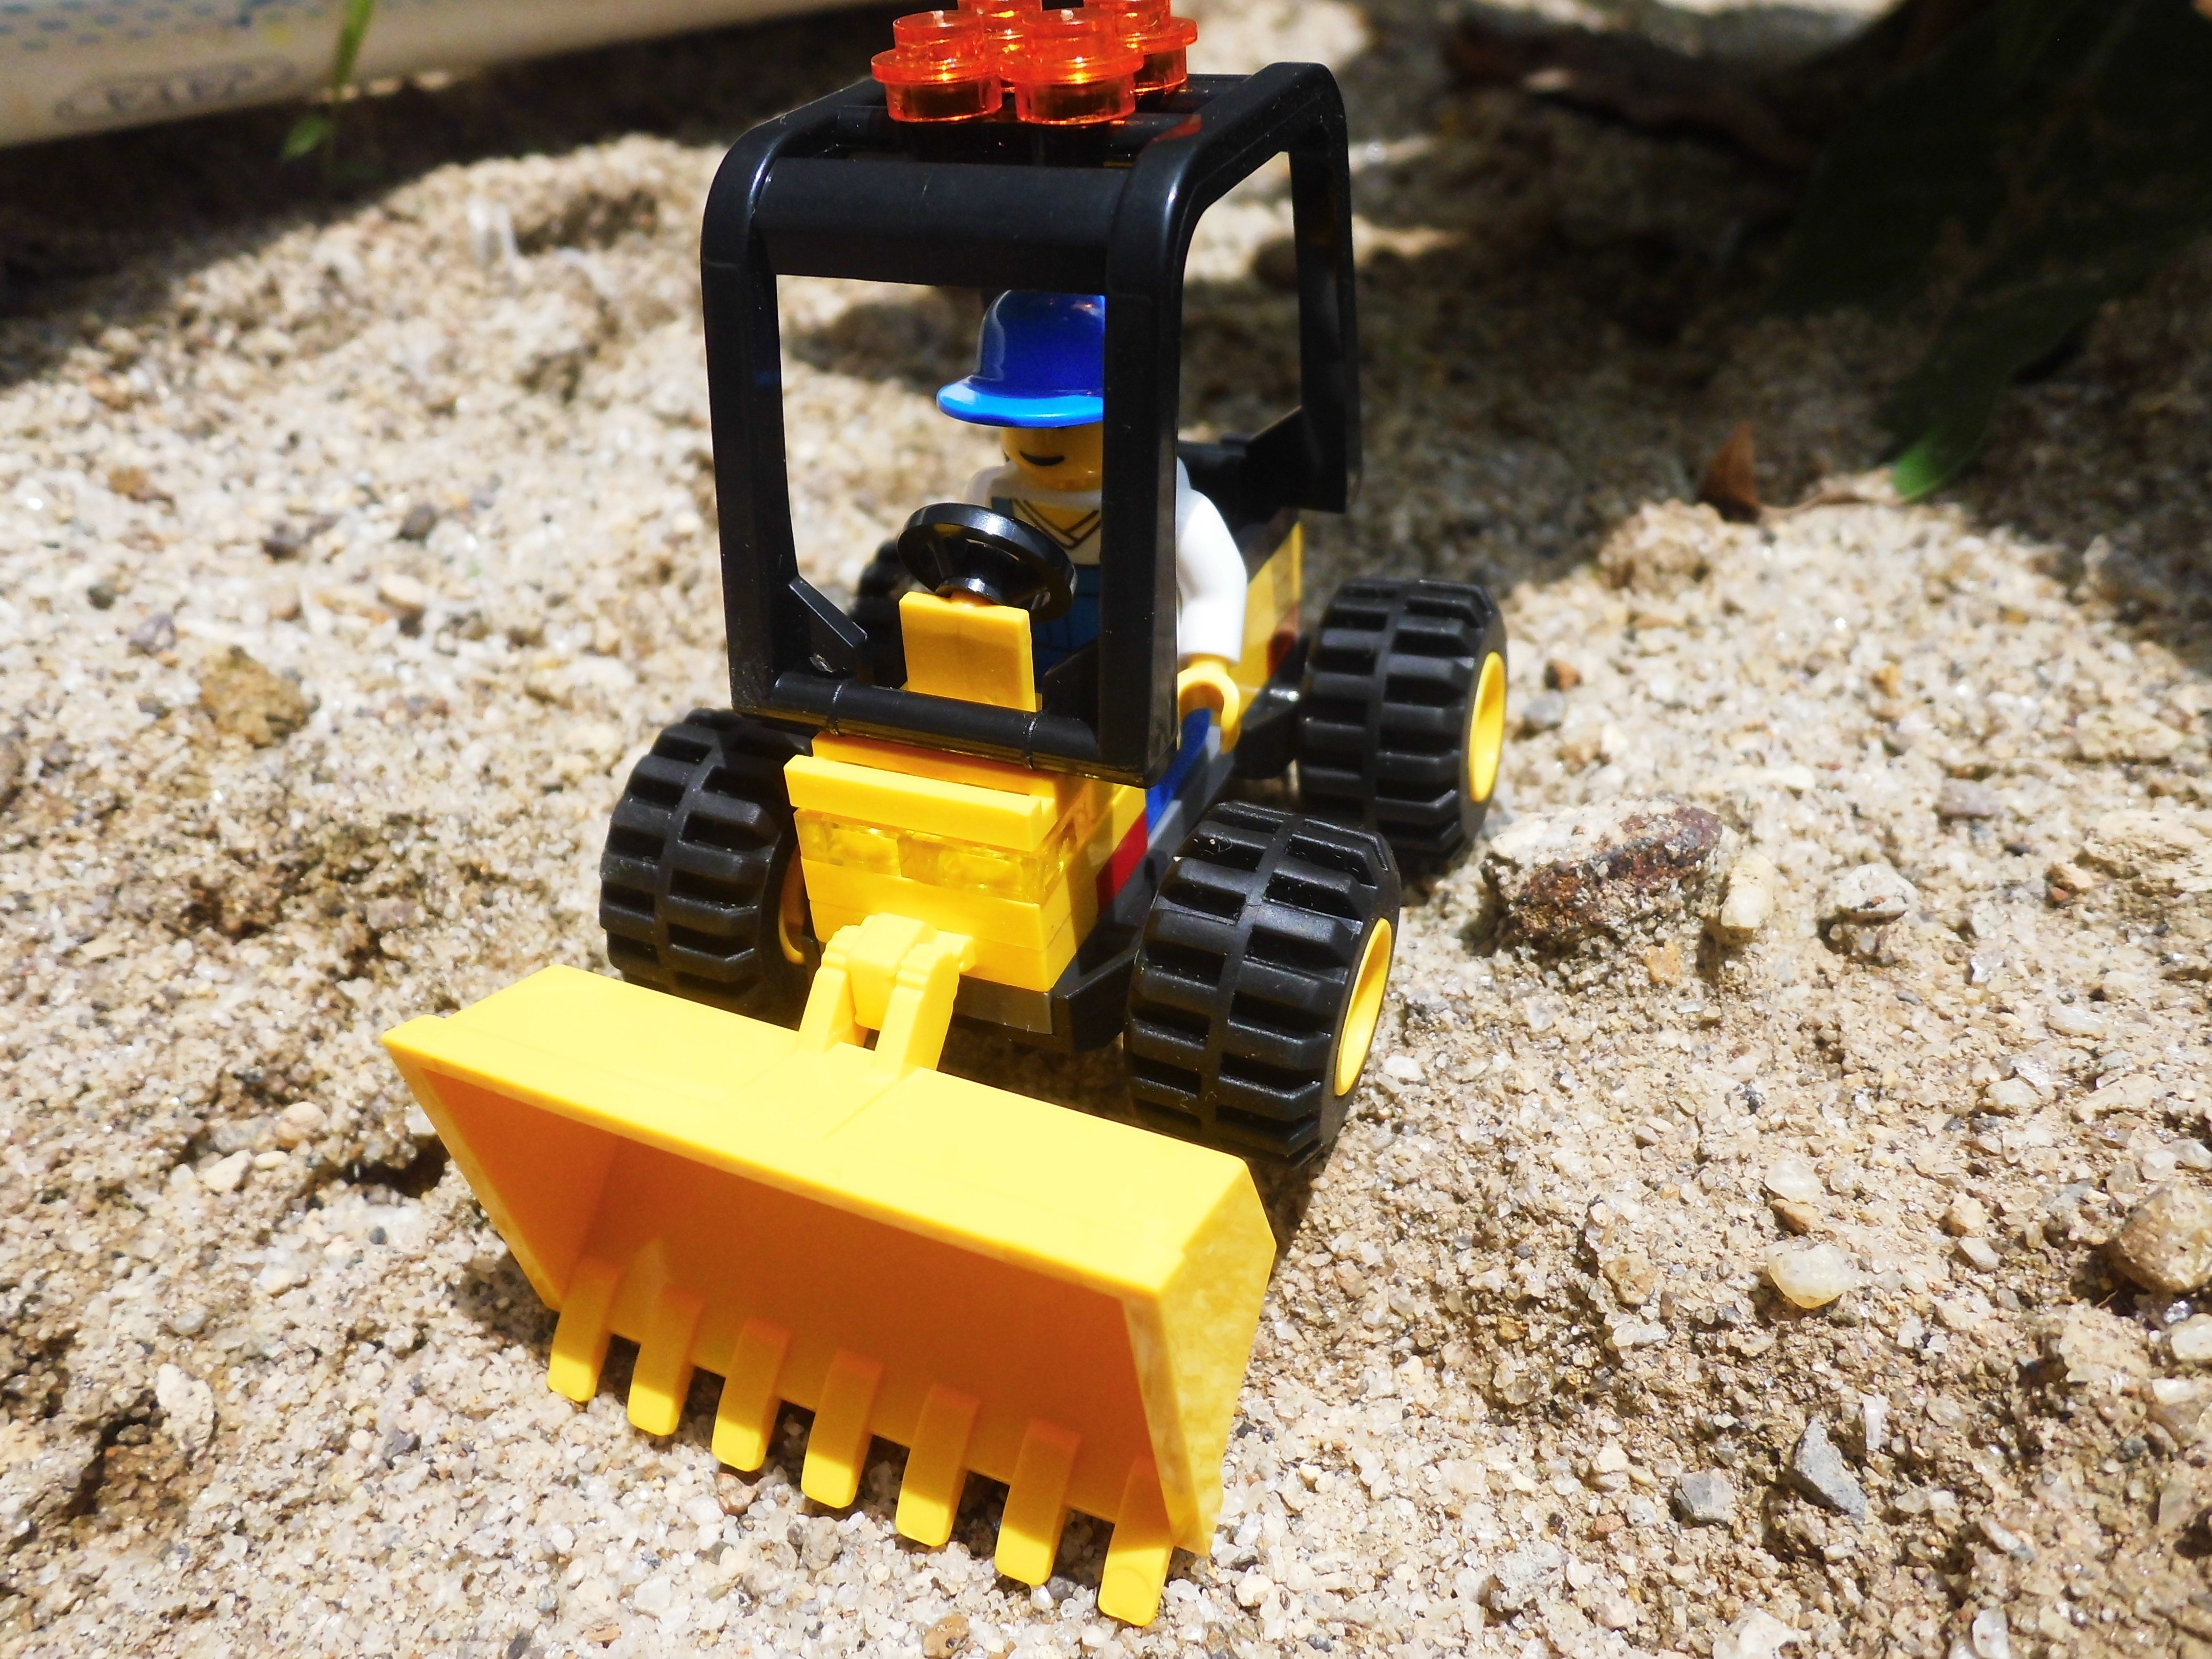 black and yellow front loader lego toy